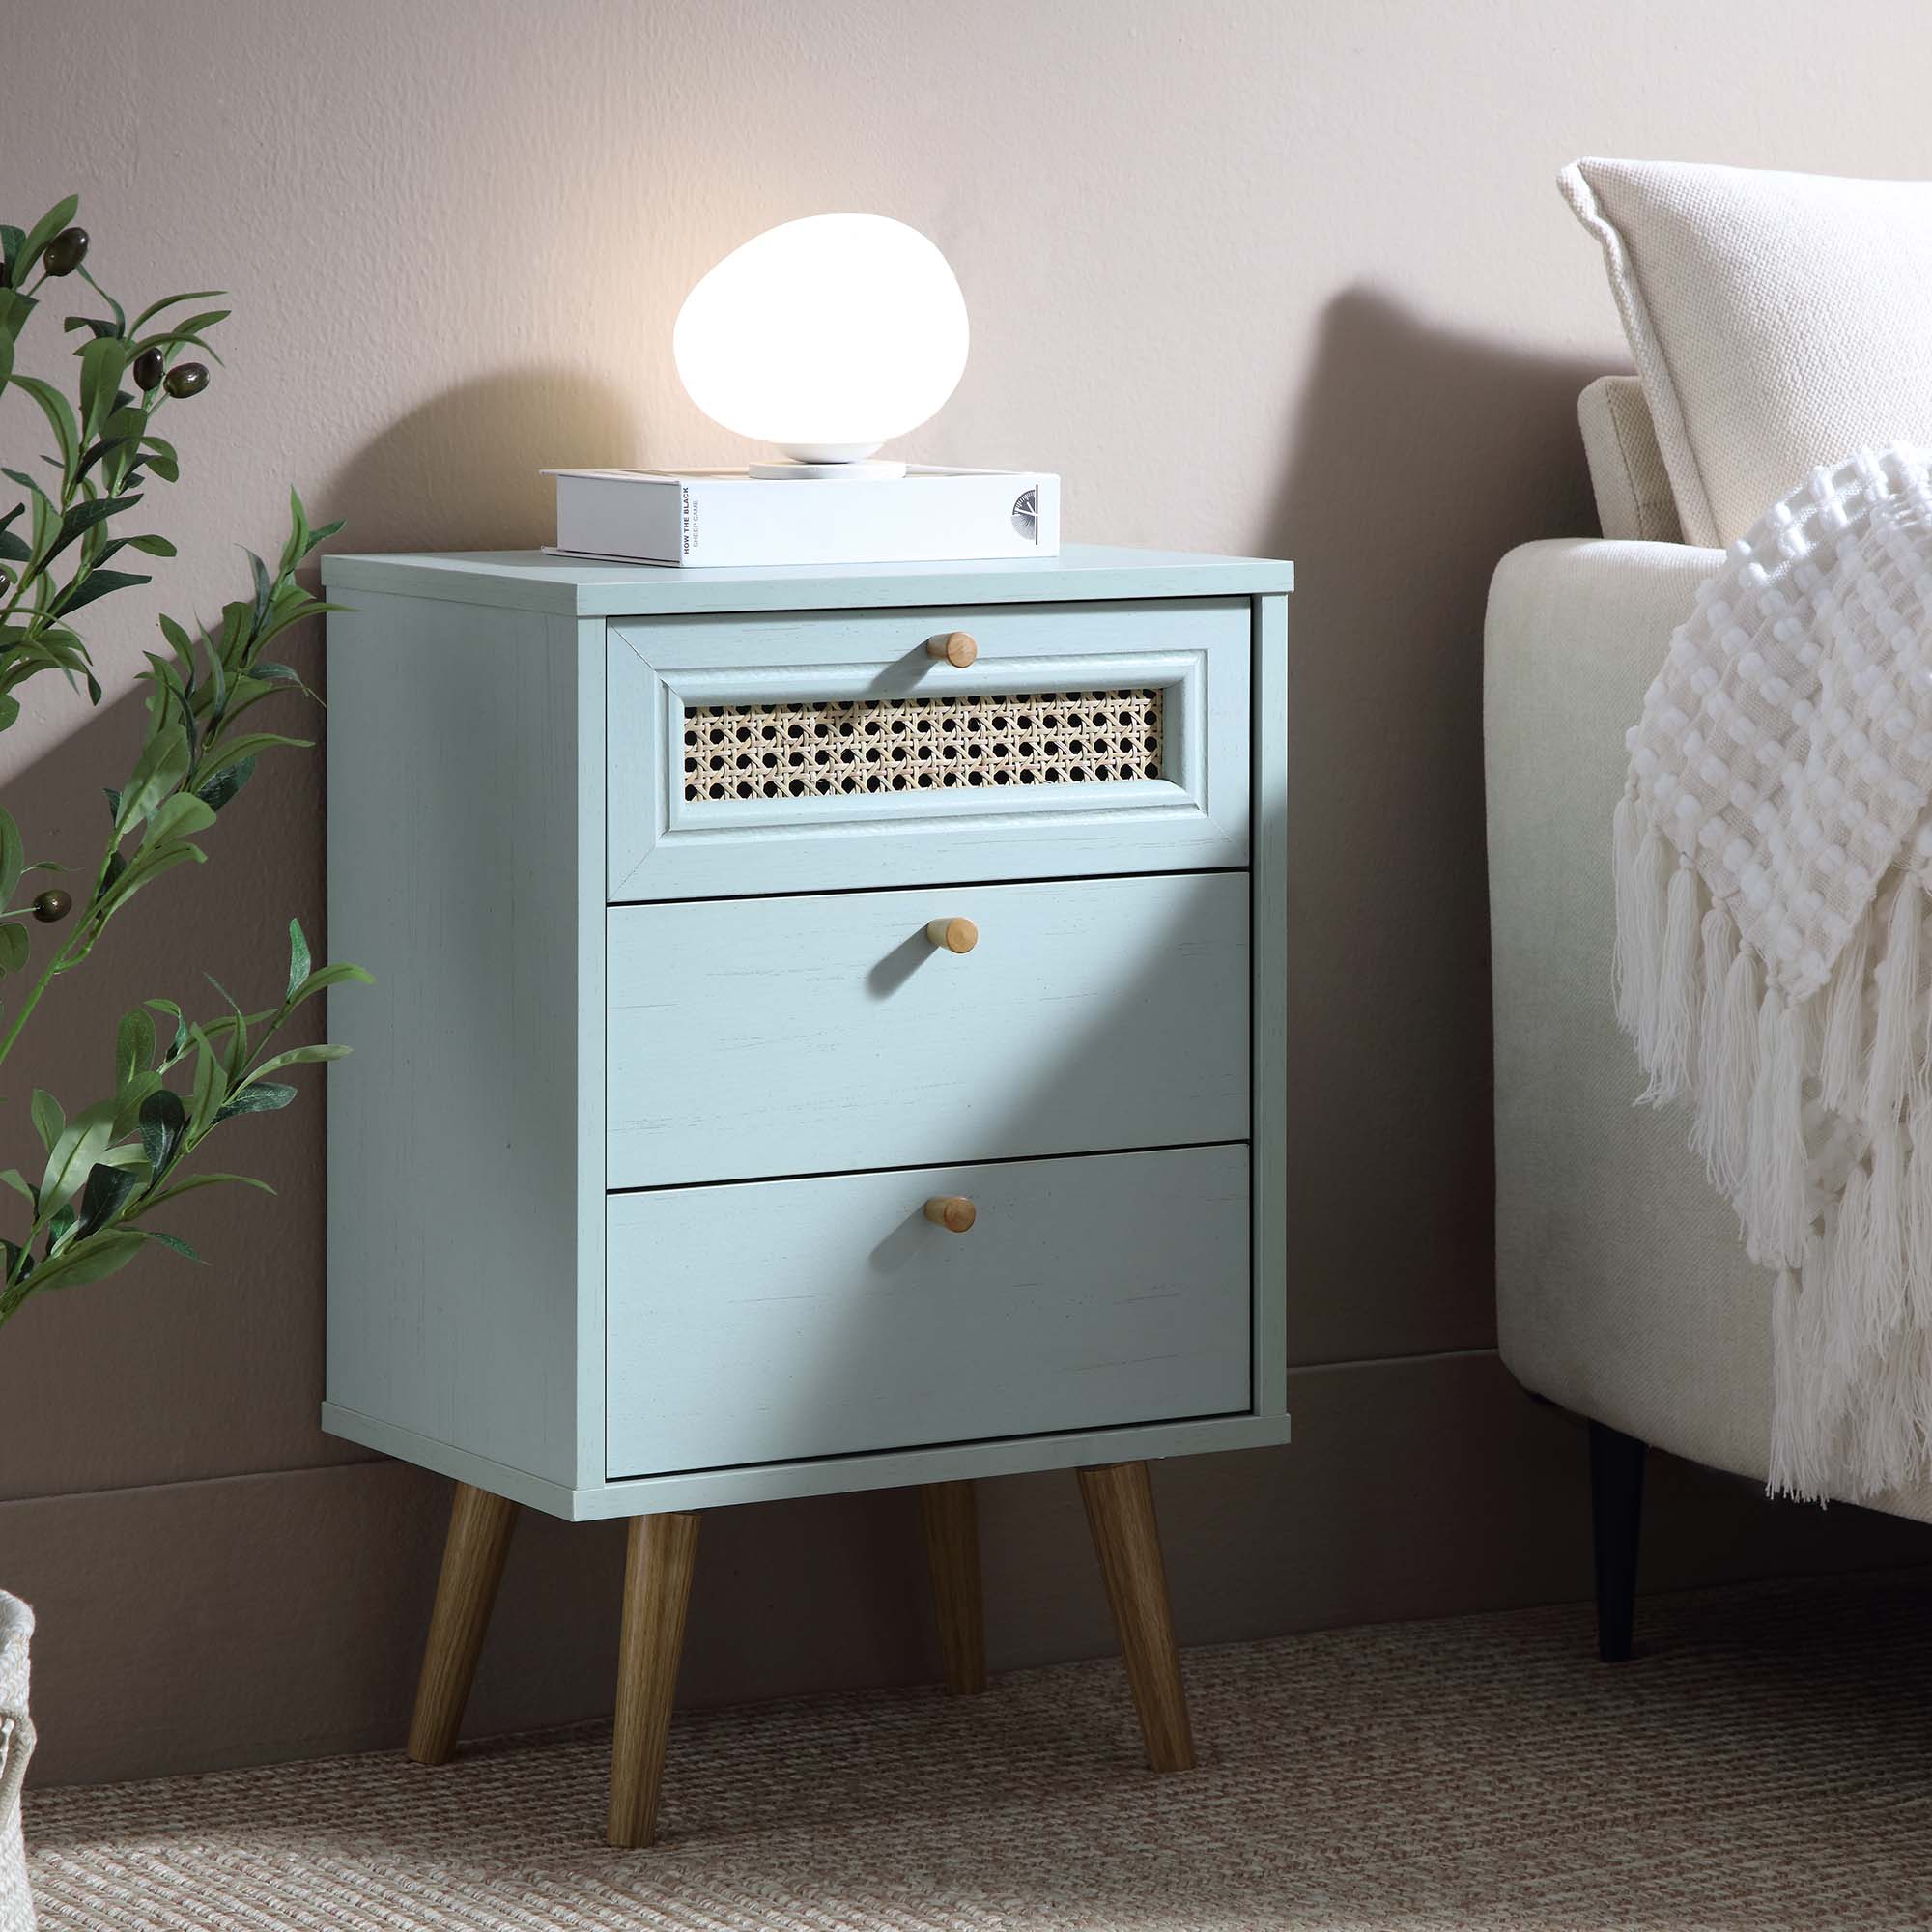 Anya Woven Rattan 3-Drawer Bedside Table in Mint Colour